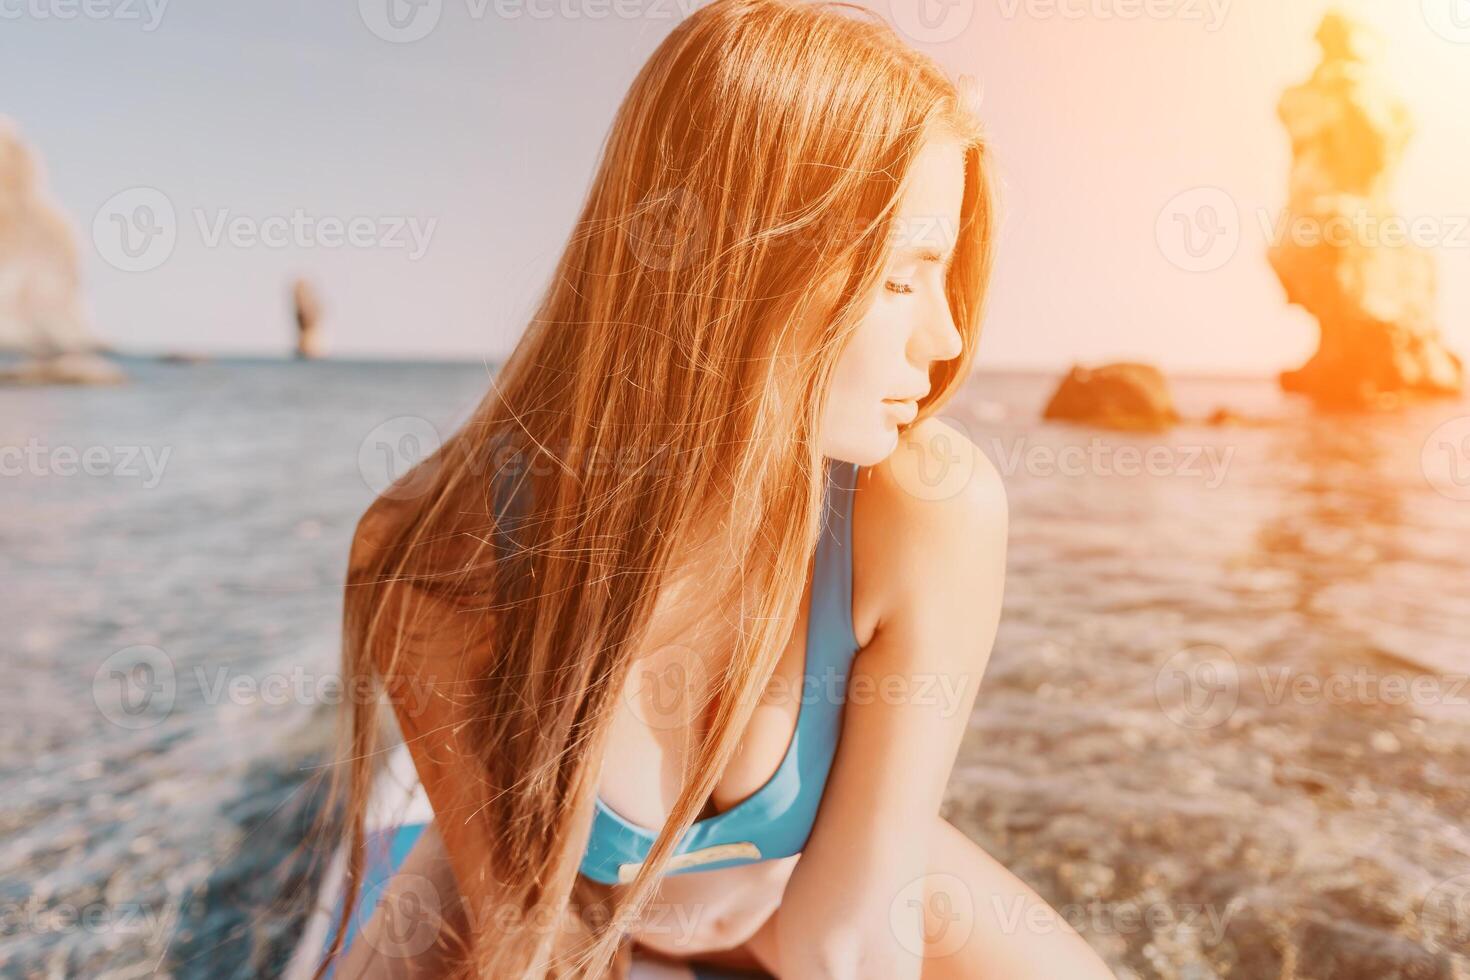 Woman sea sup. Close up portrait of happy young caucasian woman with long hair looking at camera and smiling. Cute woman portrait in a blue bikini posing on sup board in the sea photo